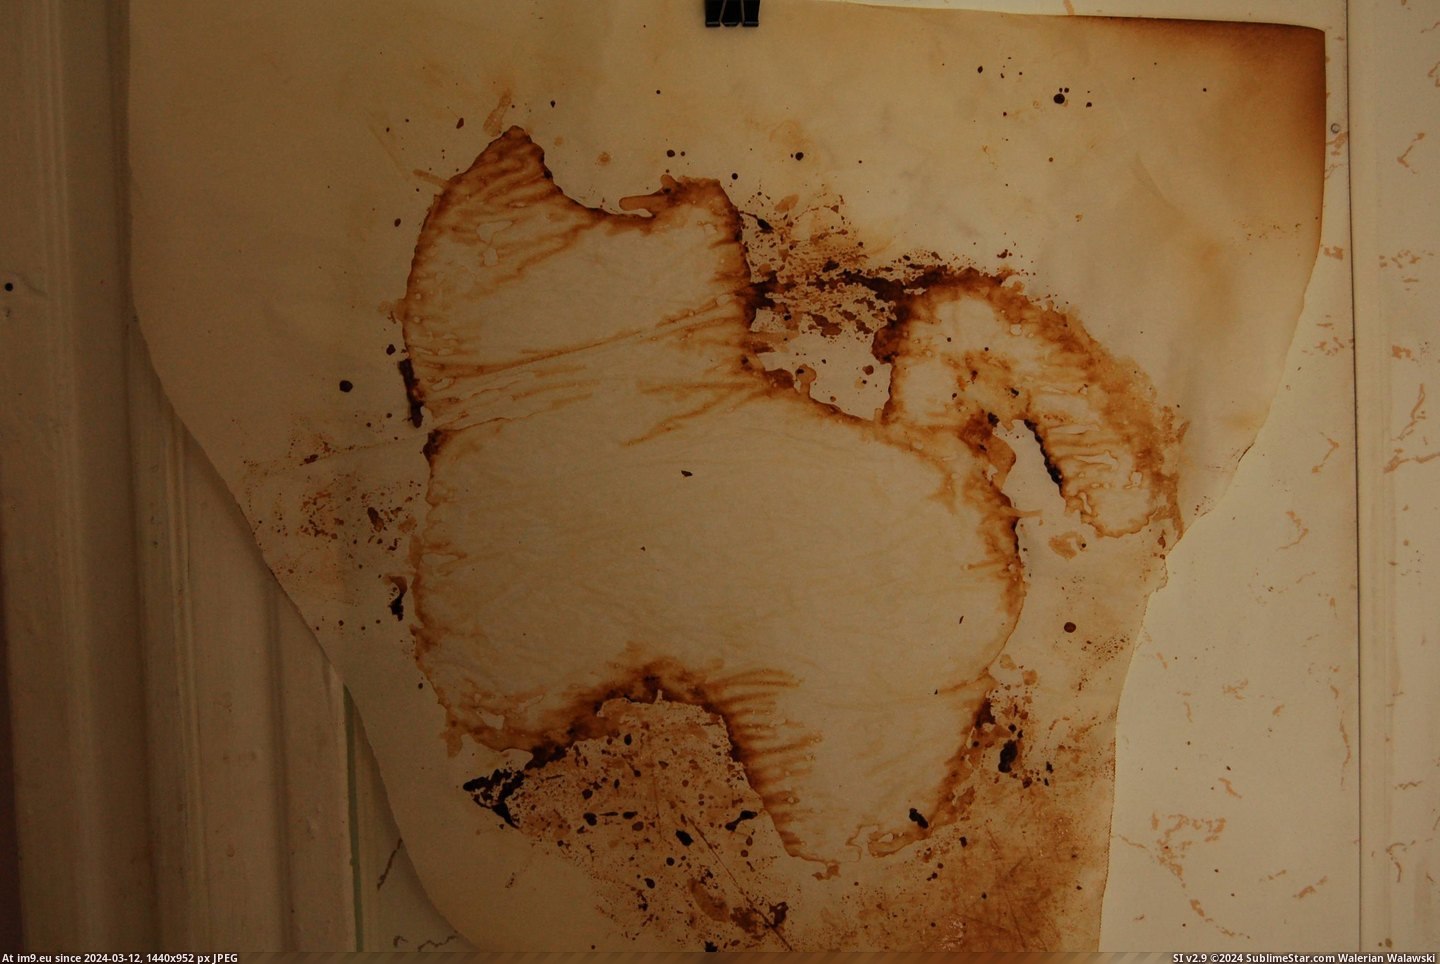 #Cat #Painting #Roommate #Cave #Cooked #Parchment #Paper #Pizza #Shaped [Mildlyinteresting] My roommate cooked a cat shaped pizza, the parchment paper he cooked it on now looks like a cave painting of Pic. (Bild von album My r/MILDLYINTERESTING favs))